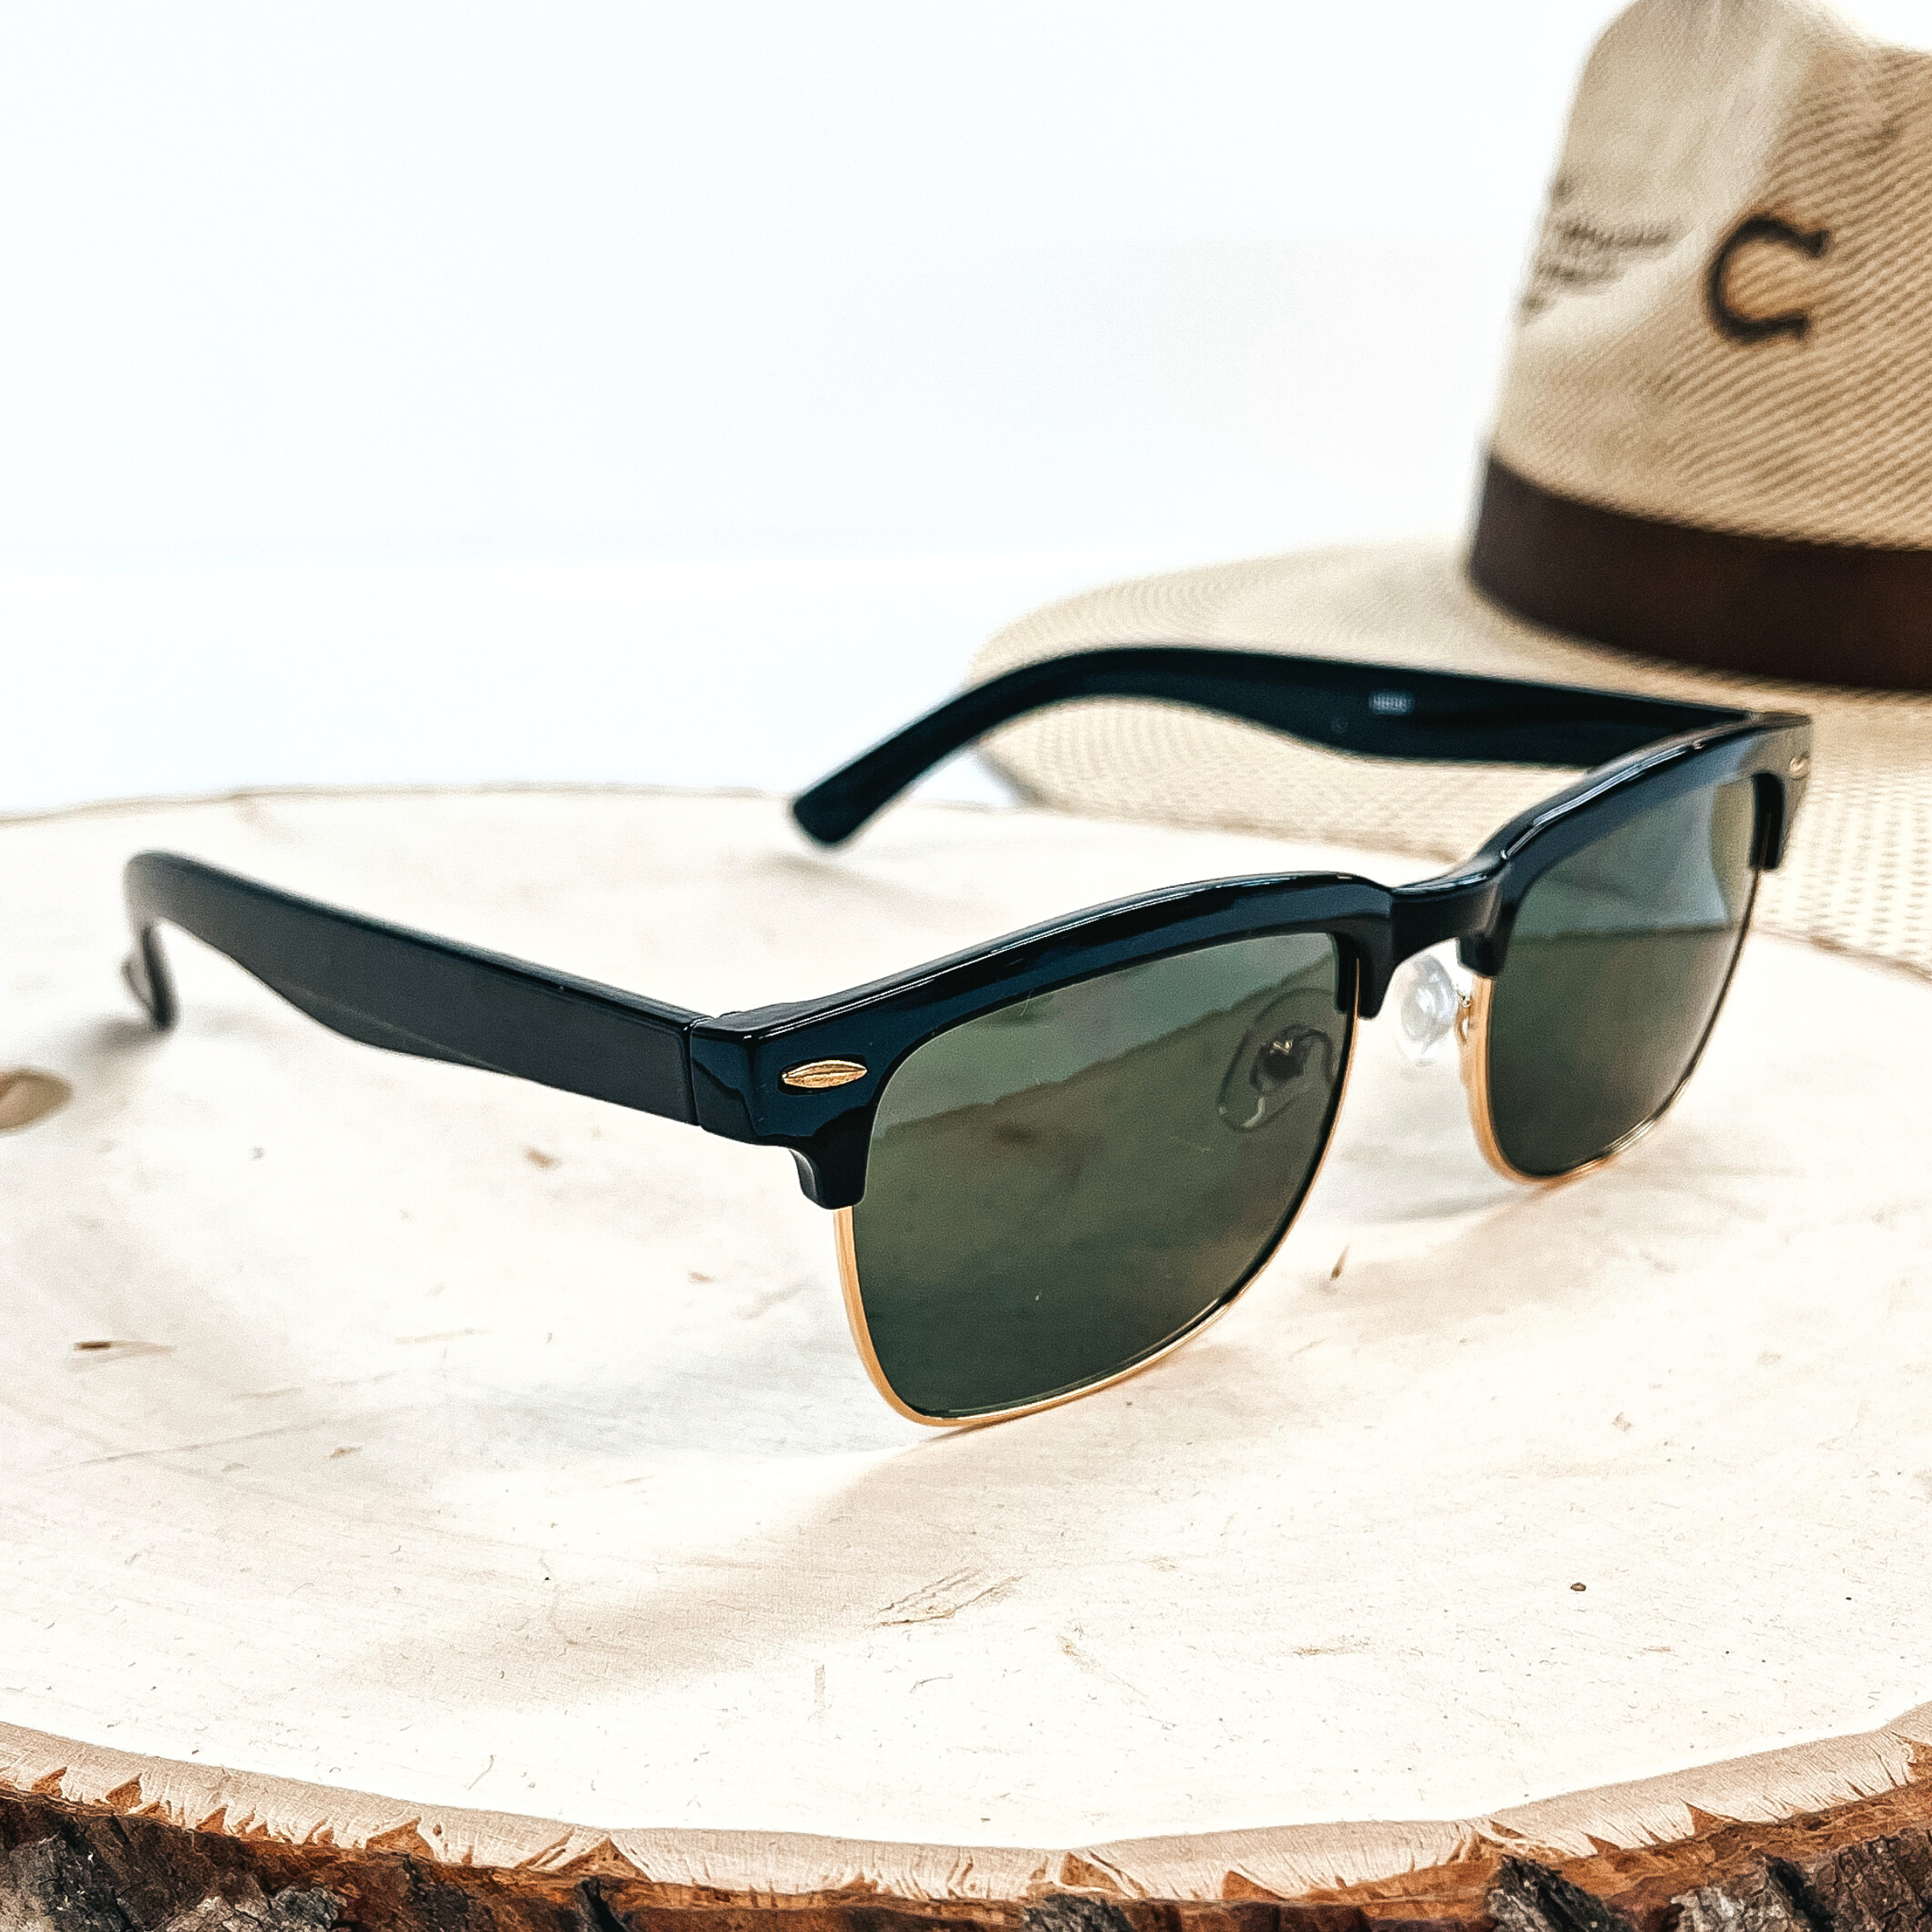 This is a pair of black sunglasses with a black/dark grey lense and a gold  outline. These sunglasses are taken on top of a wooden slate with a straw hat in the  back as decor.